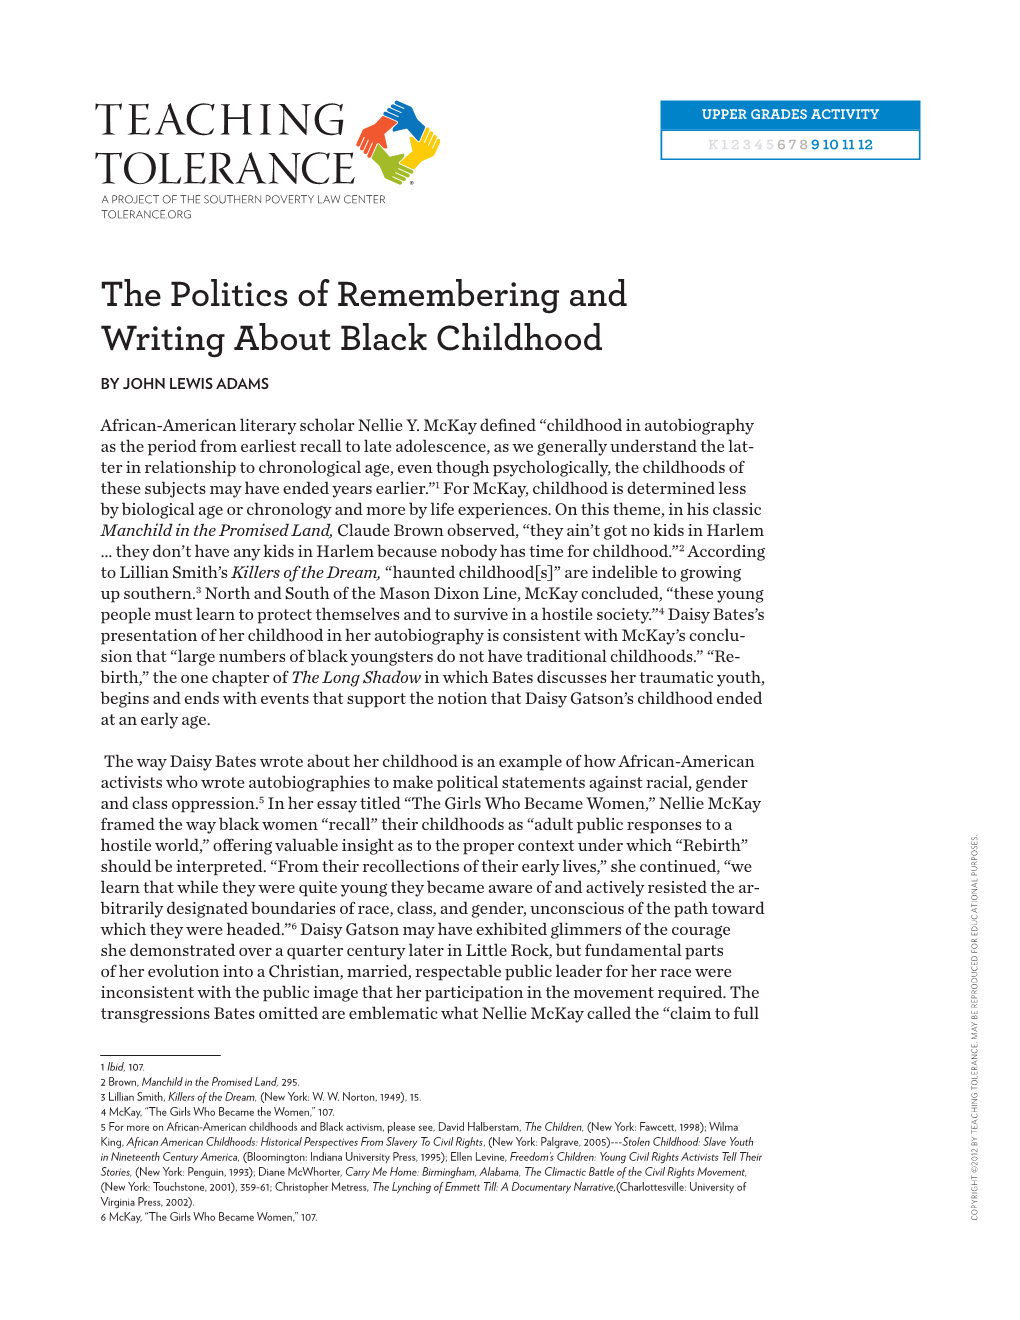 The Politics of Remembering and Writing About Black Childhood